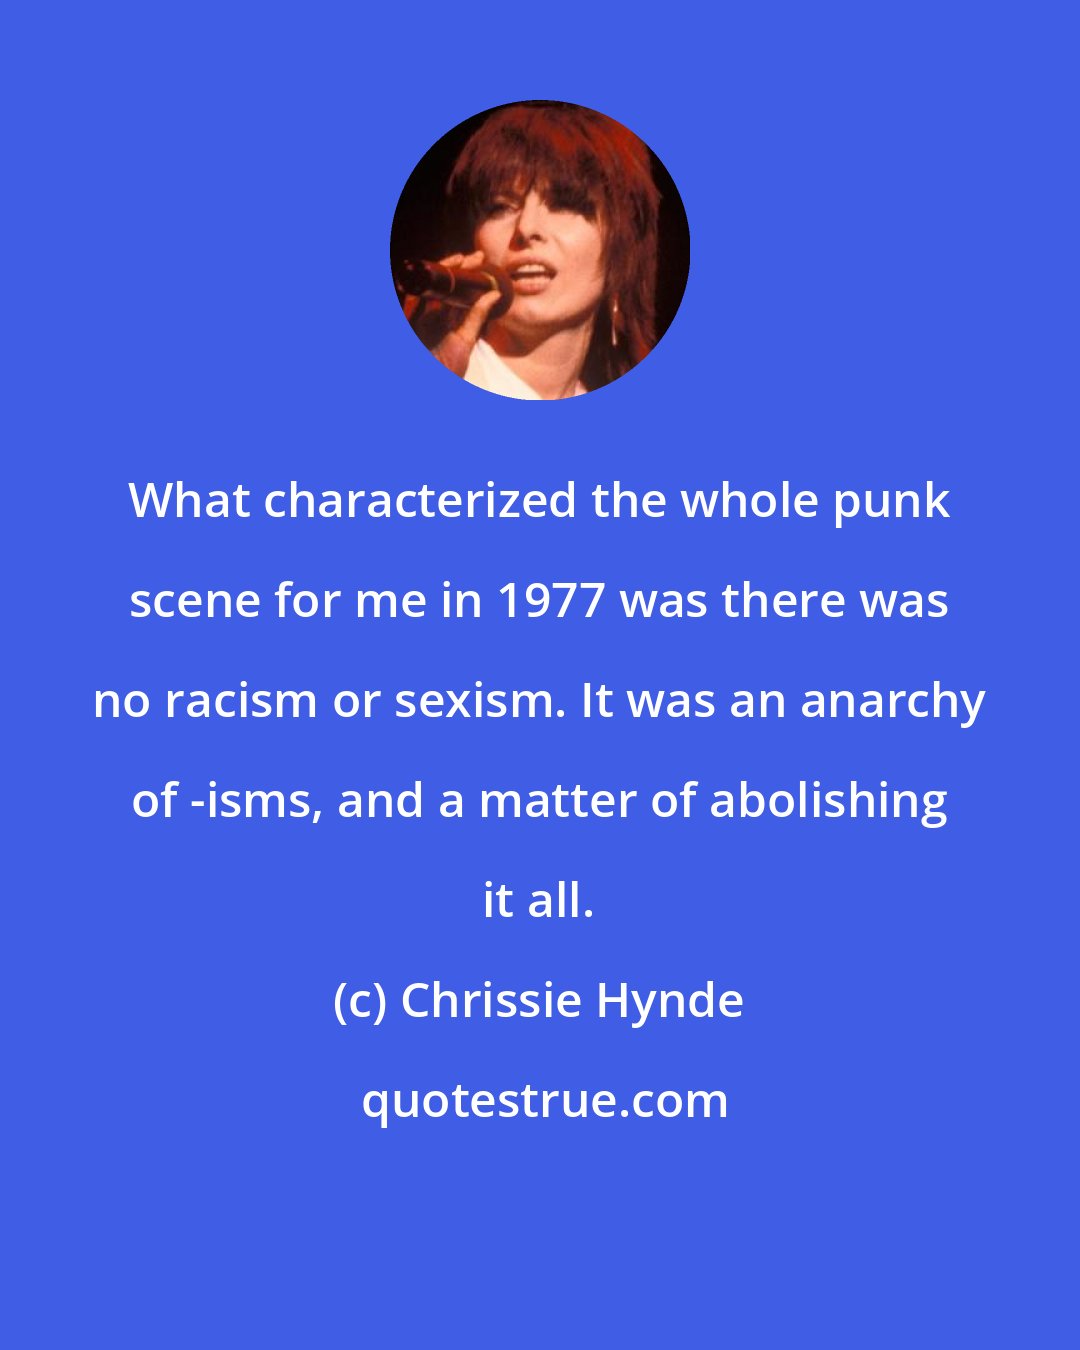 Chrissie Hynde: What characterized the whole punk scene for me in 1977 was there was no racism or sexism. It was an anarchy of -isms, and a matter of abolishing it all.